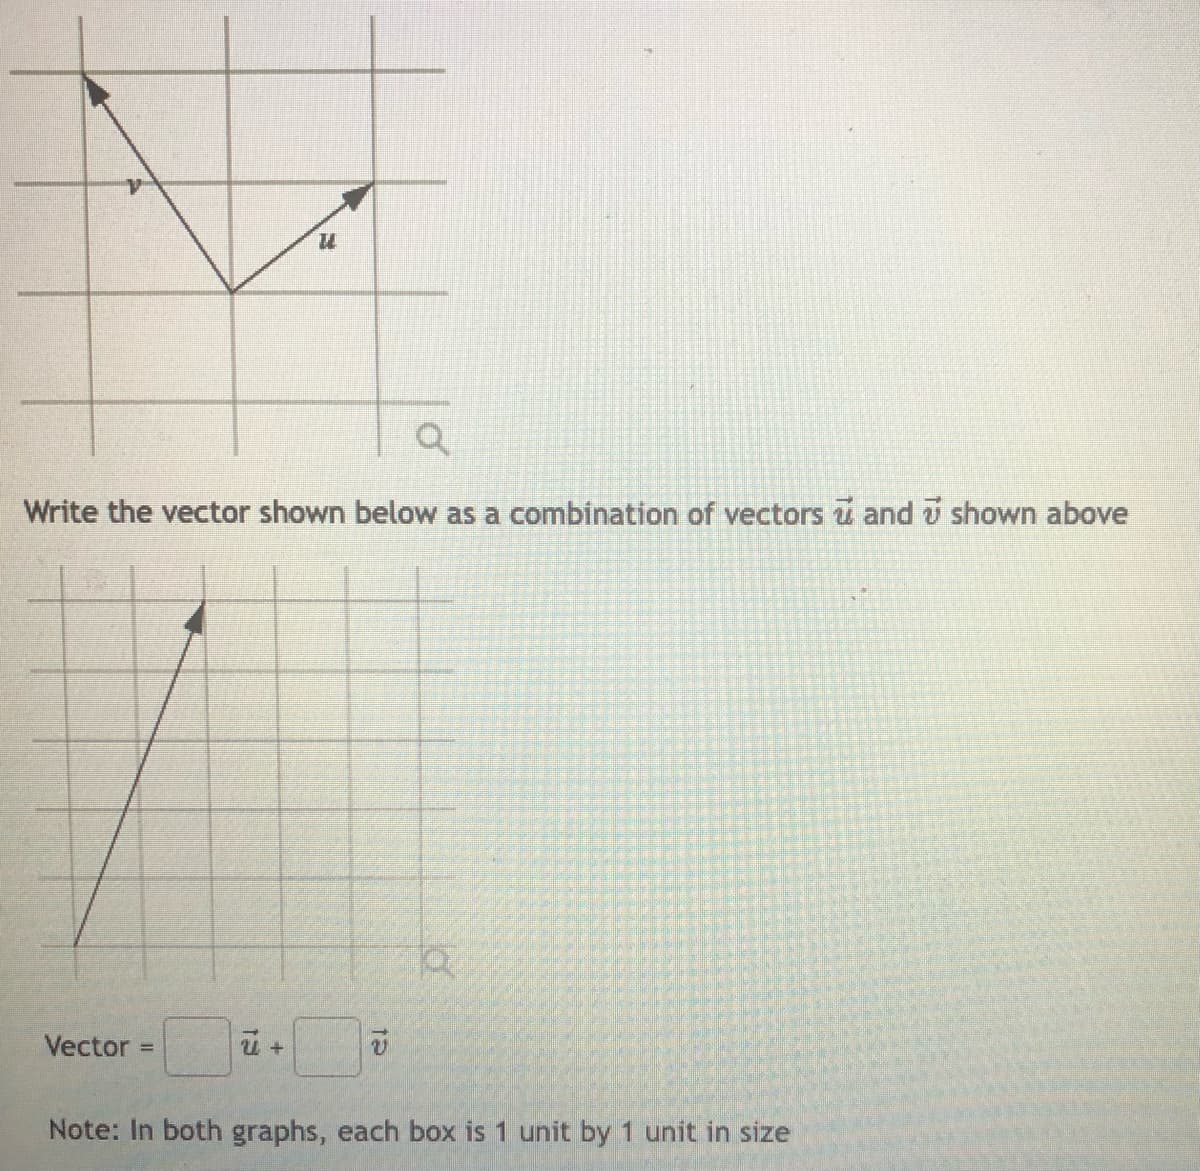 Write the vector shown below as a combination of vectors u and i shown above
Vector
Note: In both graphs, each box is 1 unit by 1 unit in size
